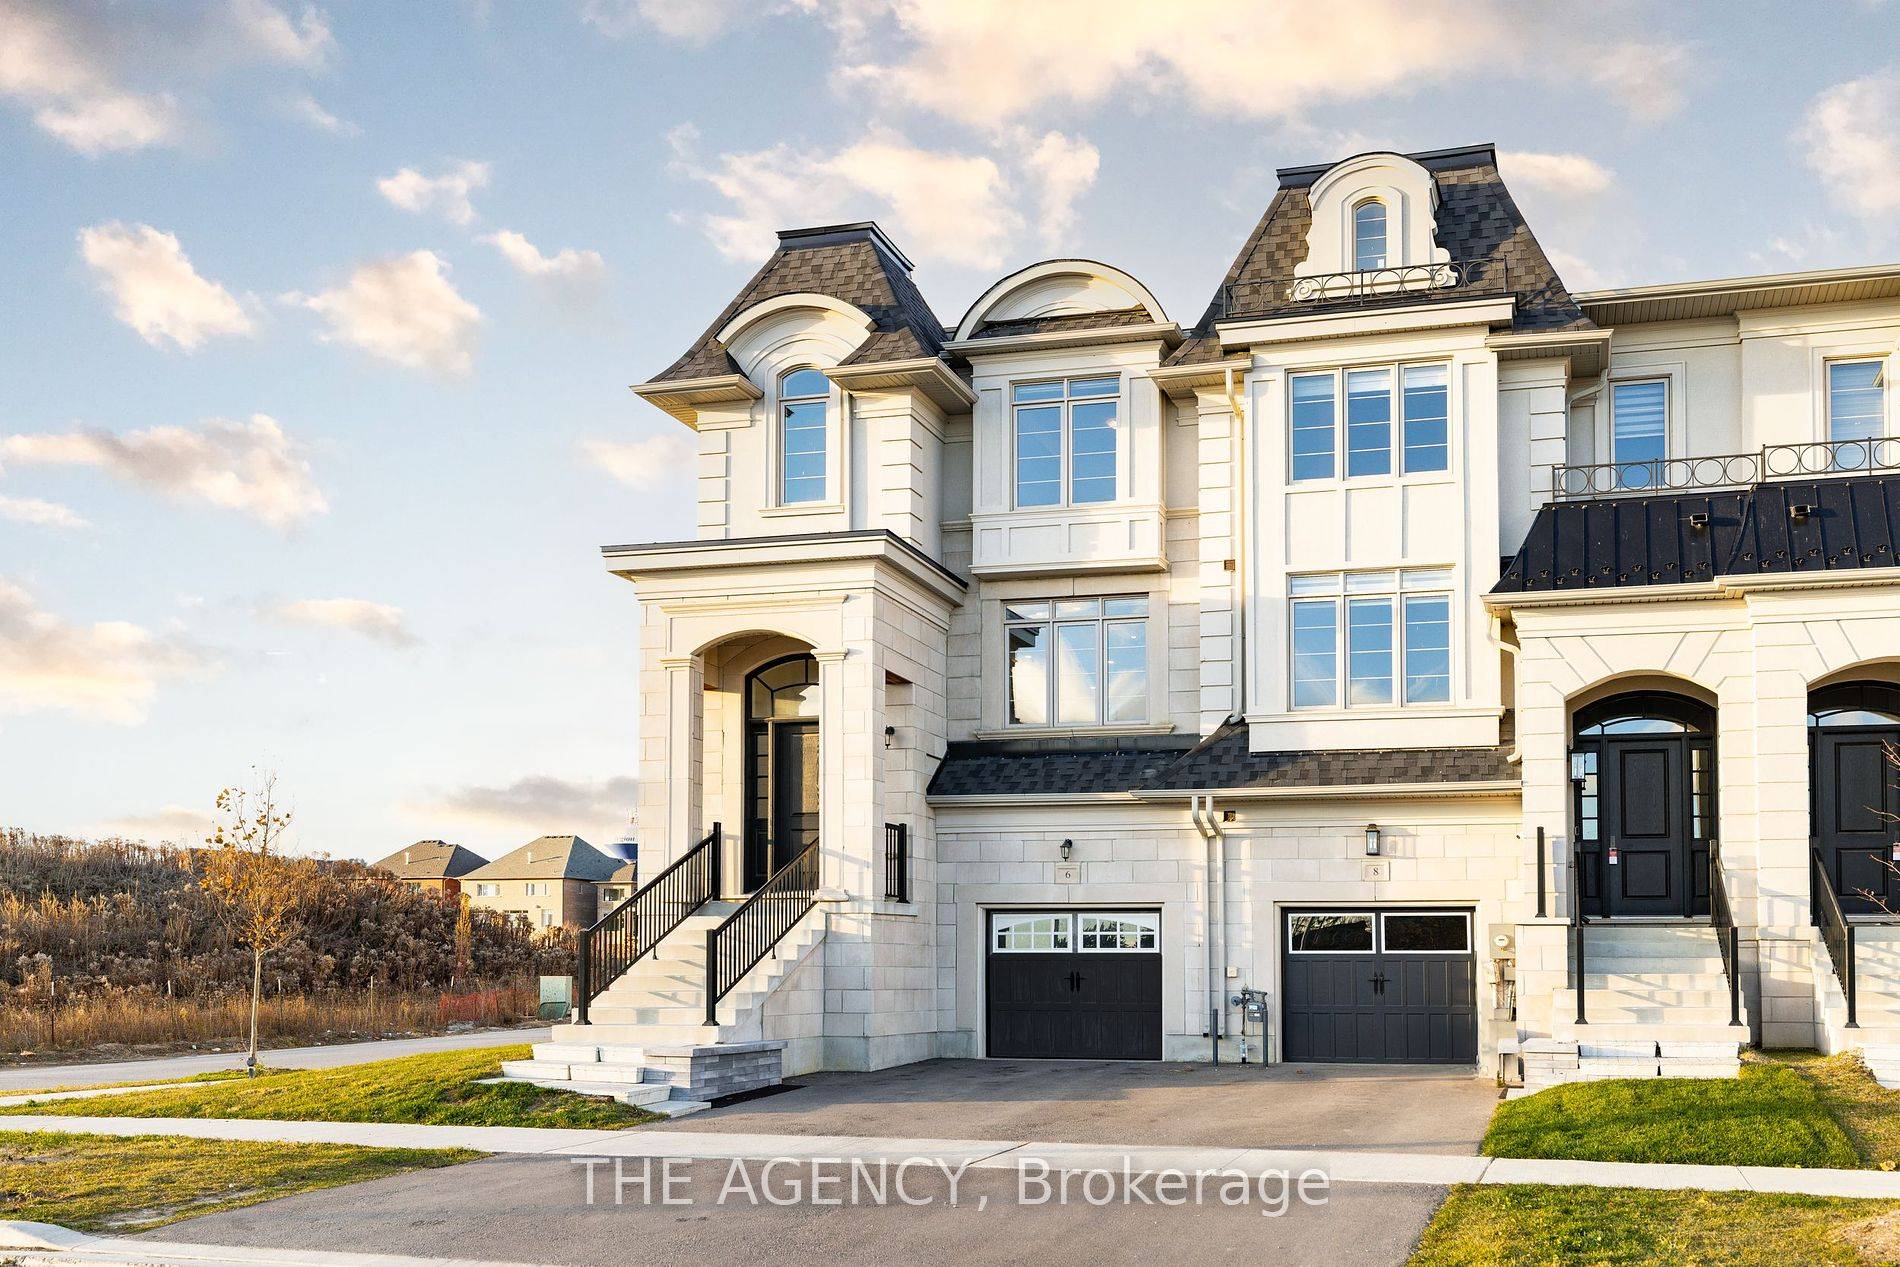 Introducing this executive luxury townhome, an exquisite townhome that redefines opulence.